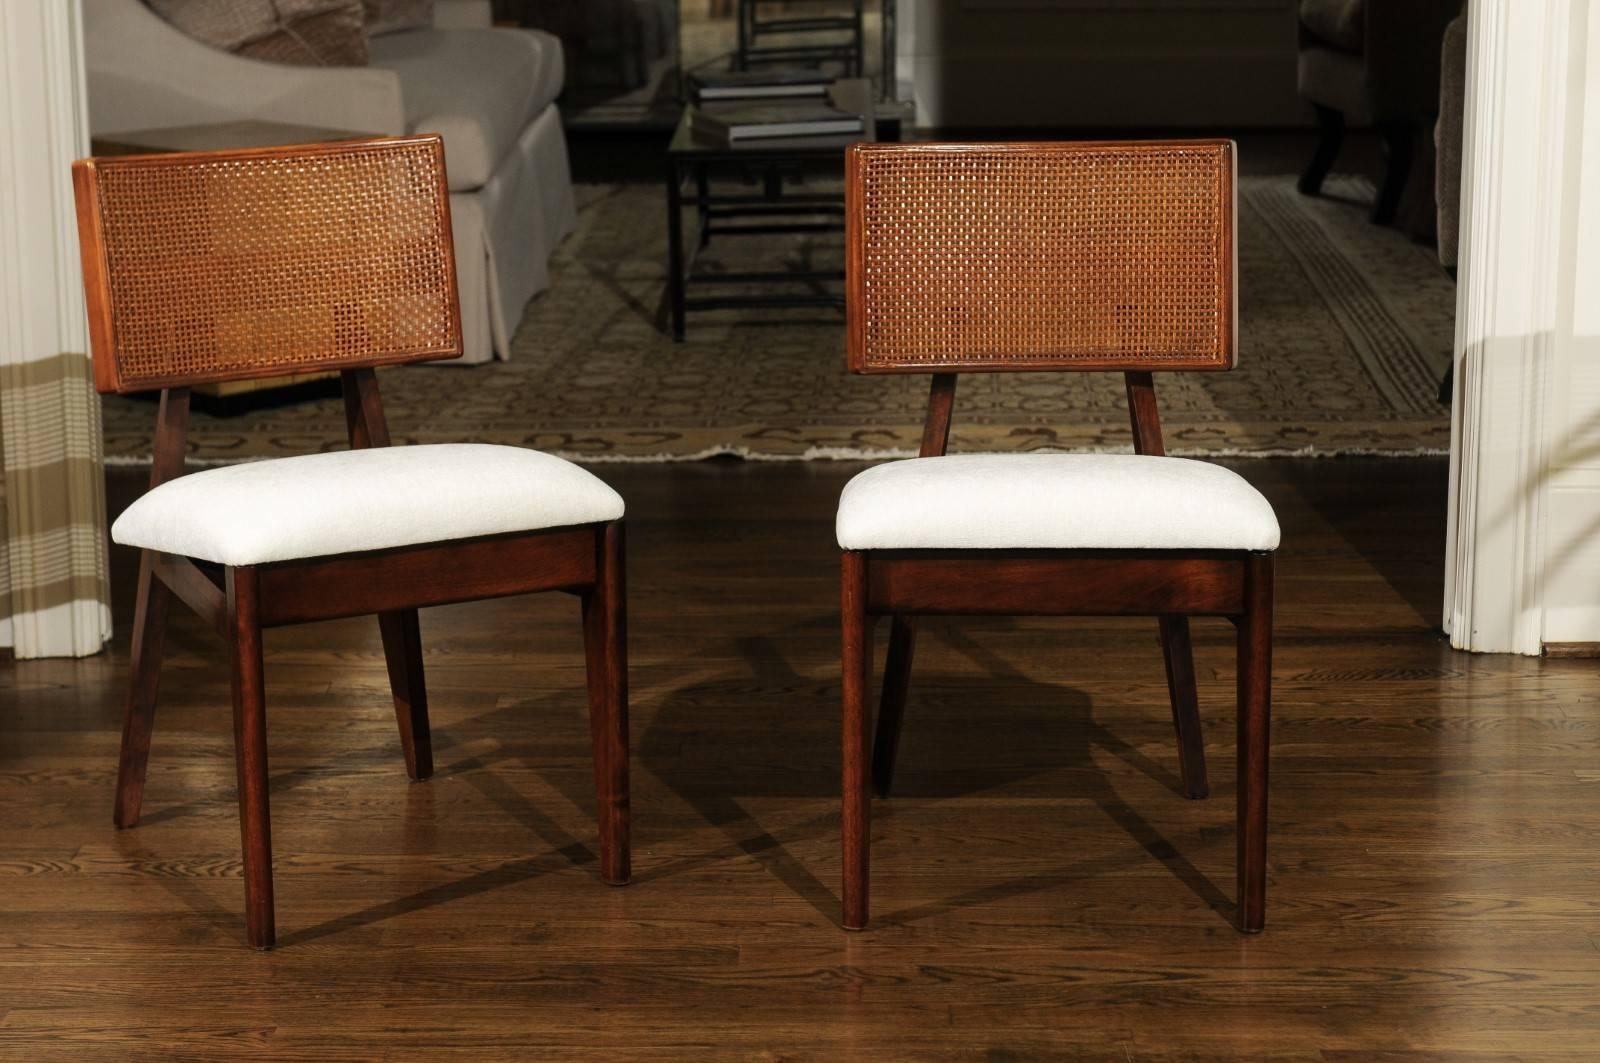 An exquisite set of eight (8) rare cane back dining chairs (Model number 4669) by the esteemed George Nelson for Herman Miller, circa 1949. Single examples of this chair are difficult to locate; a set of this size is the Collector's equivalent of